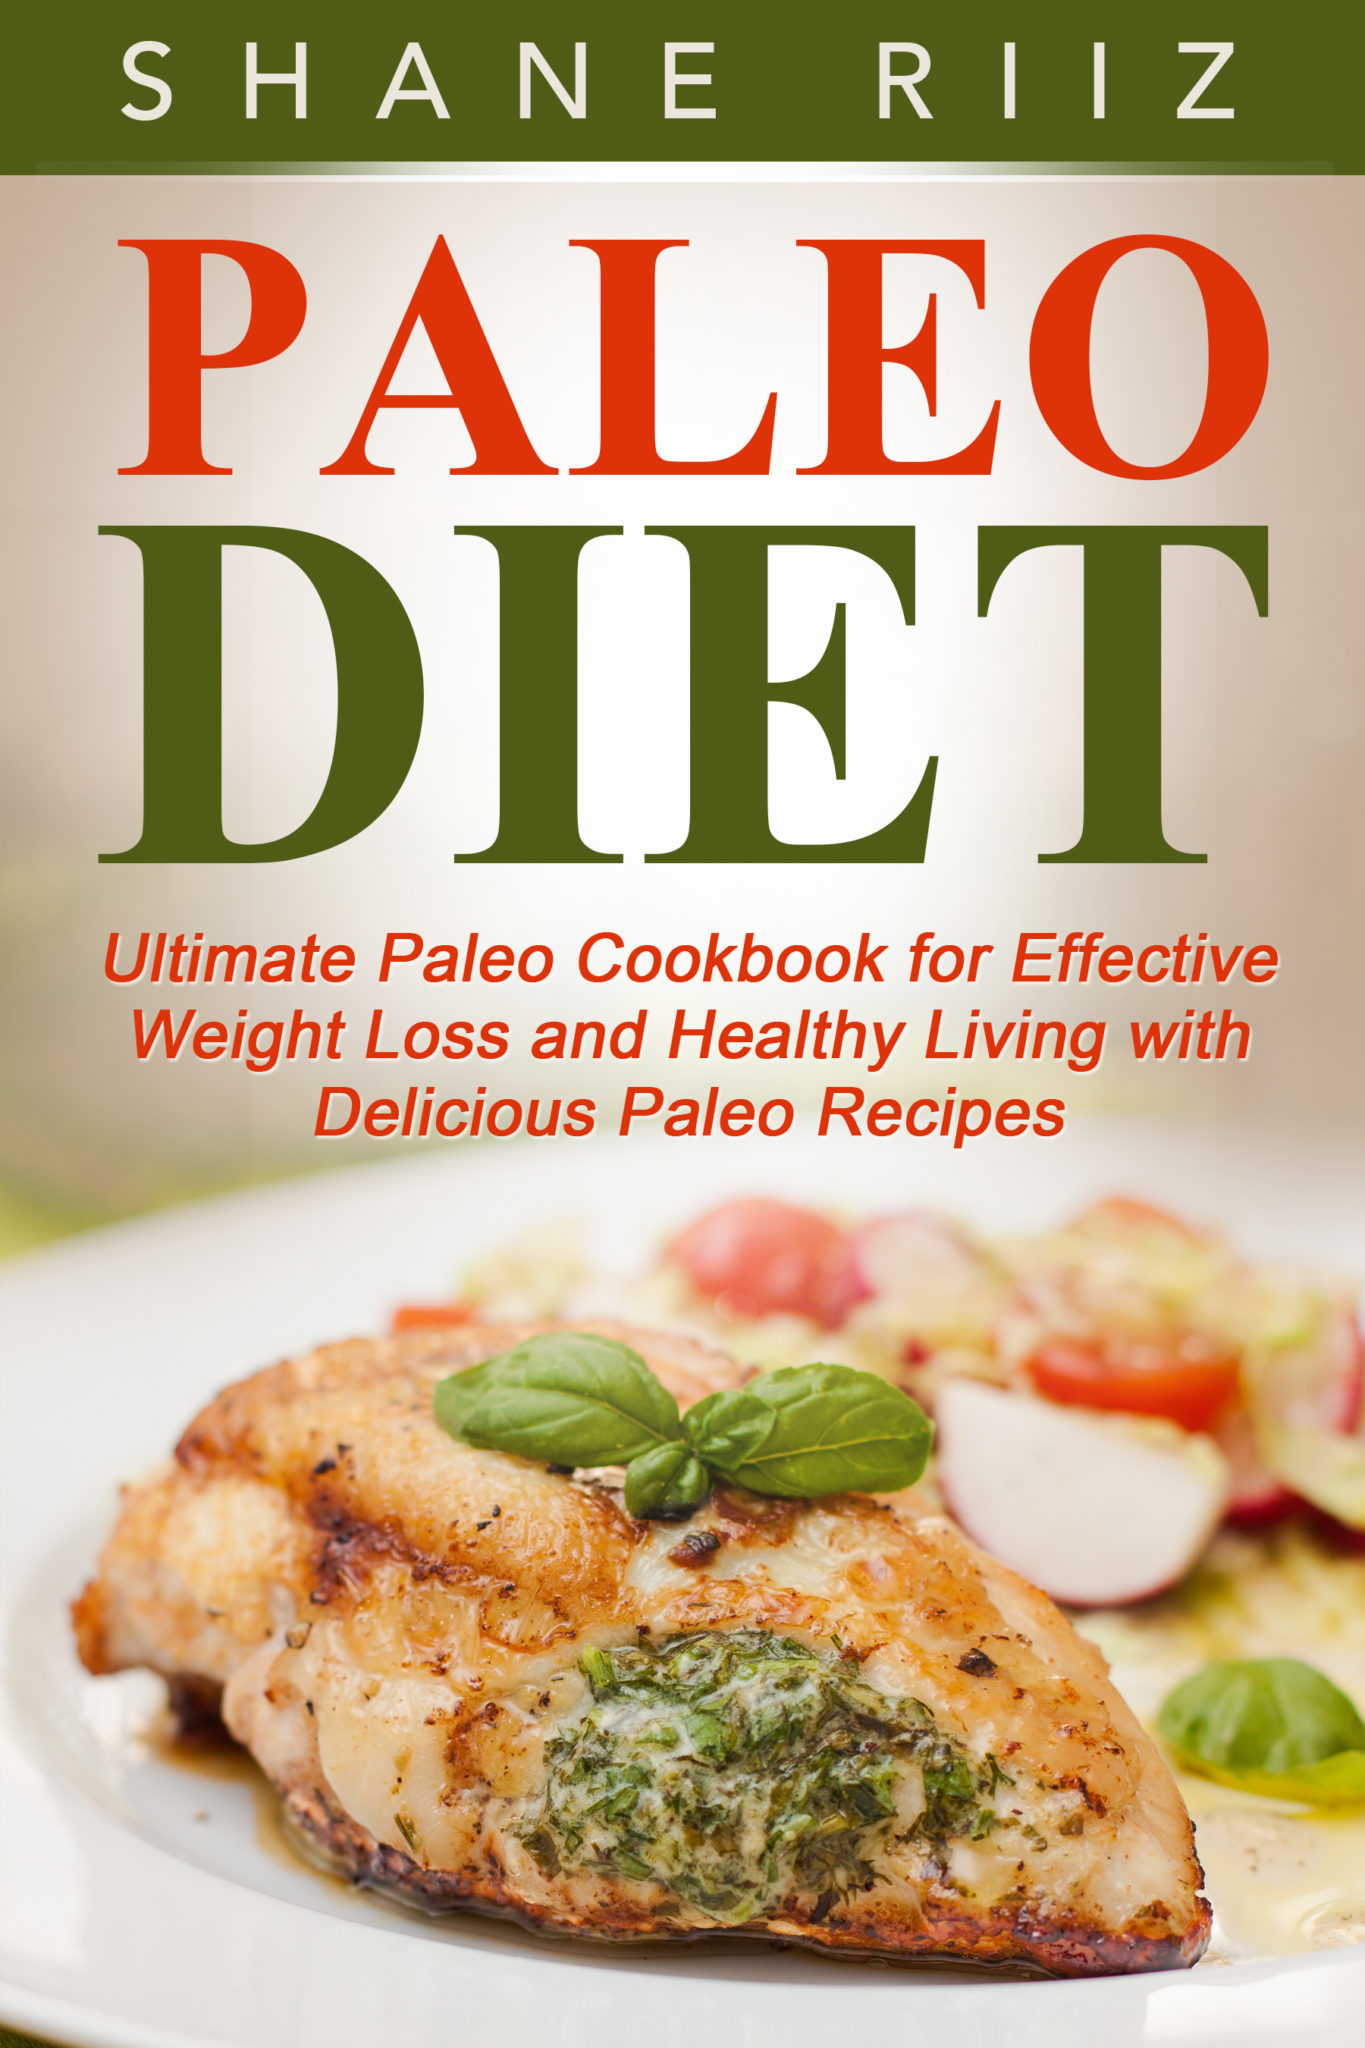 FREE: Paleo Diet: Ultimate Paleo Cookbook for Effective Weight Loss and Healthy Living with Delicious Paleo Recipes by Shane Riiz